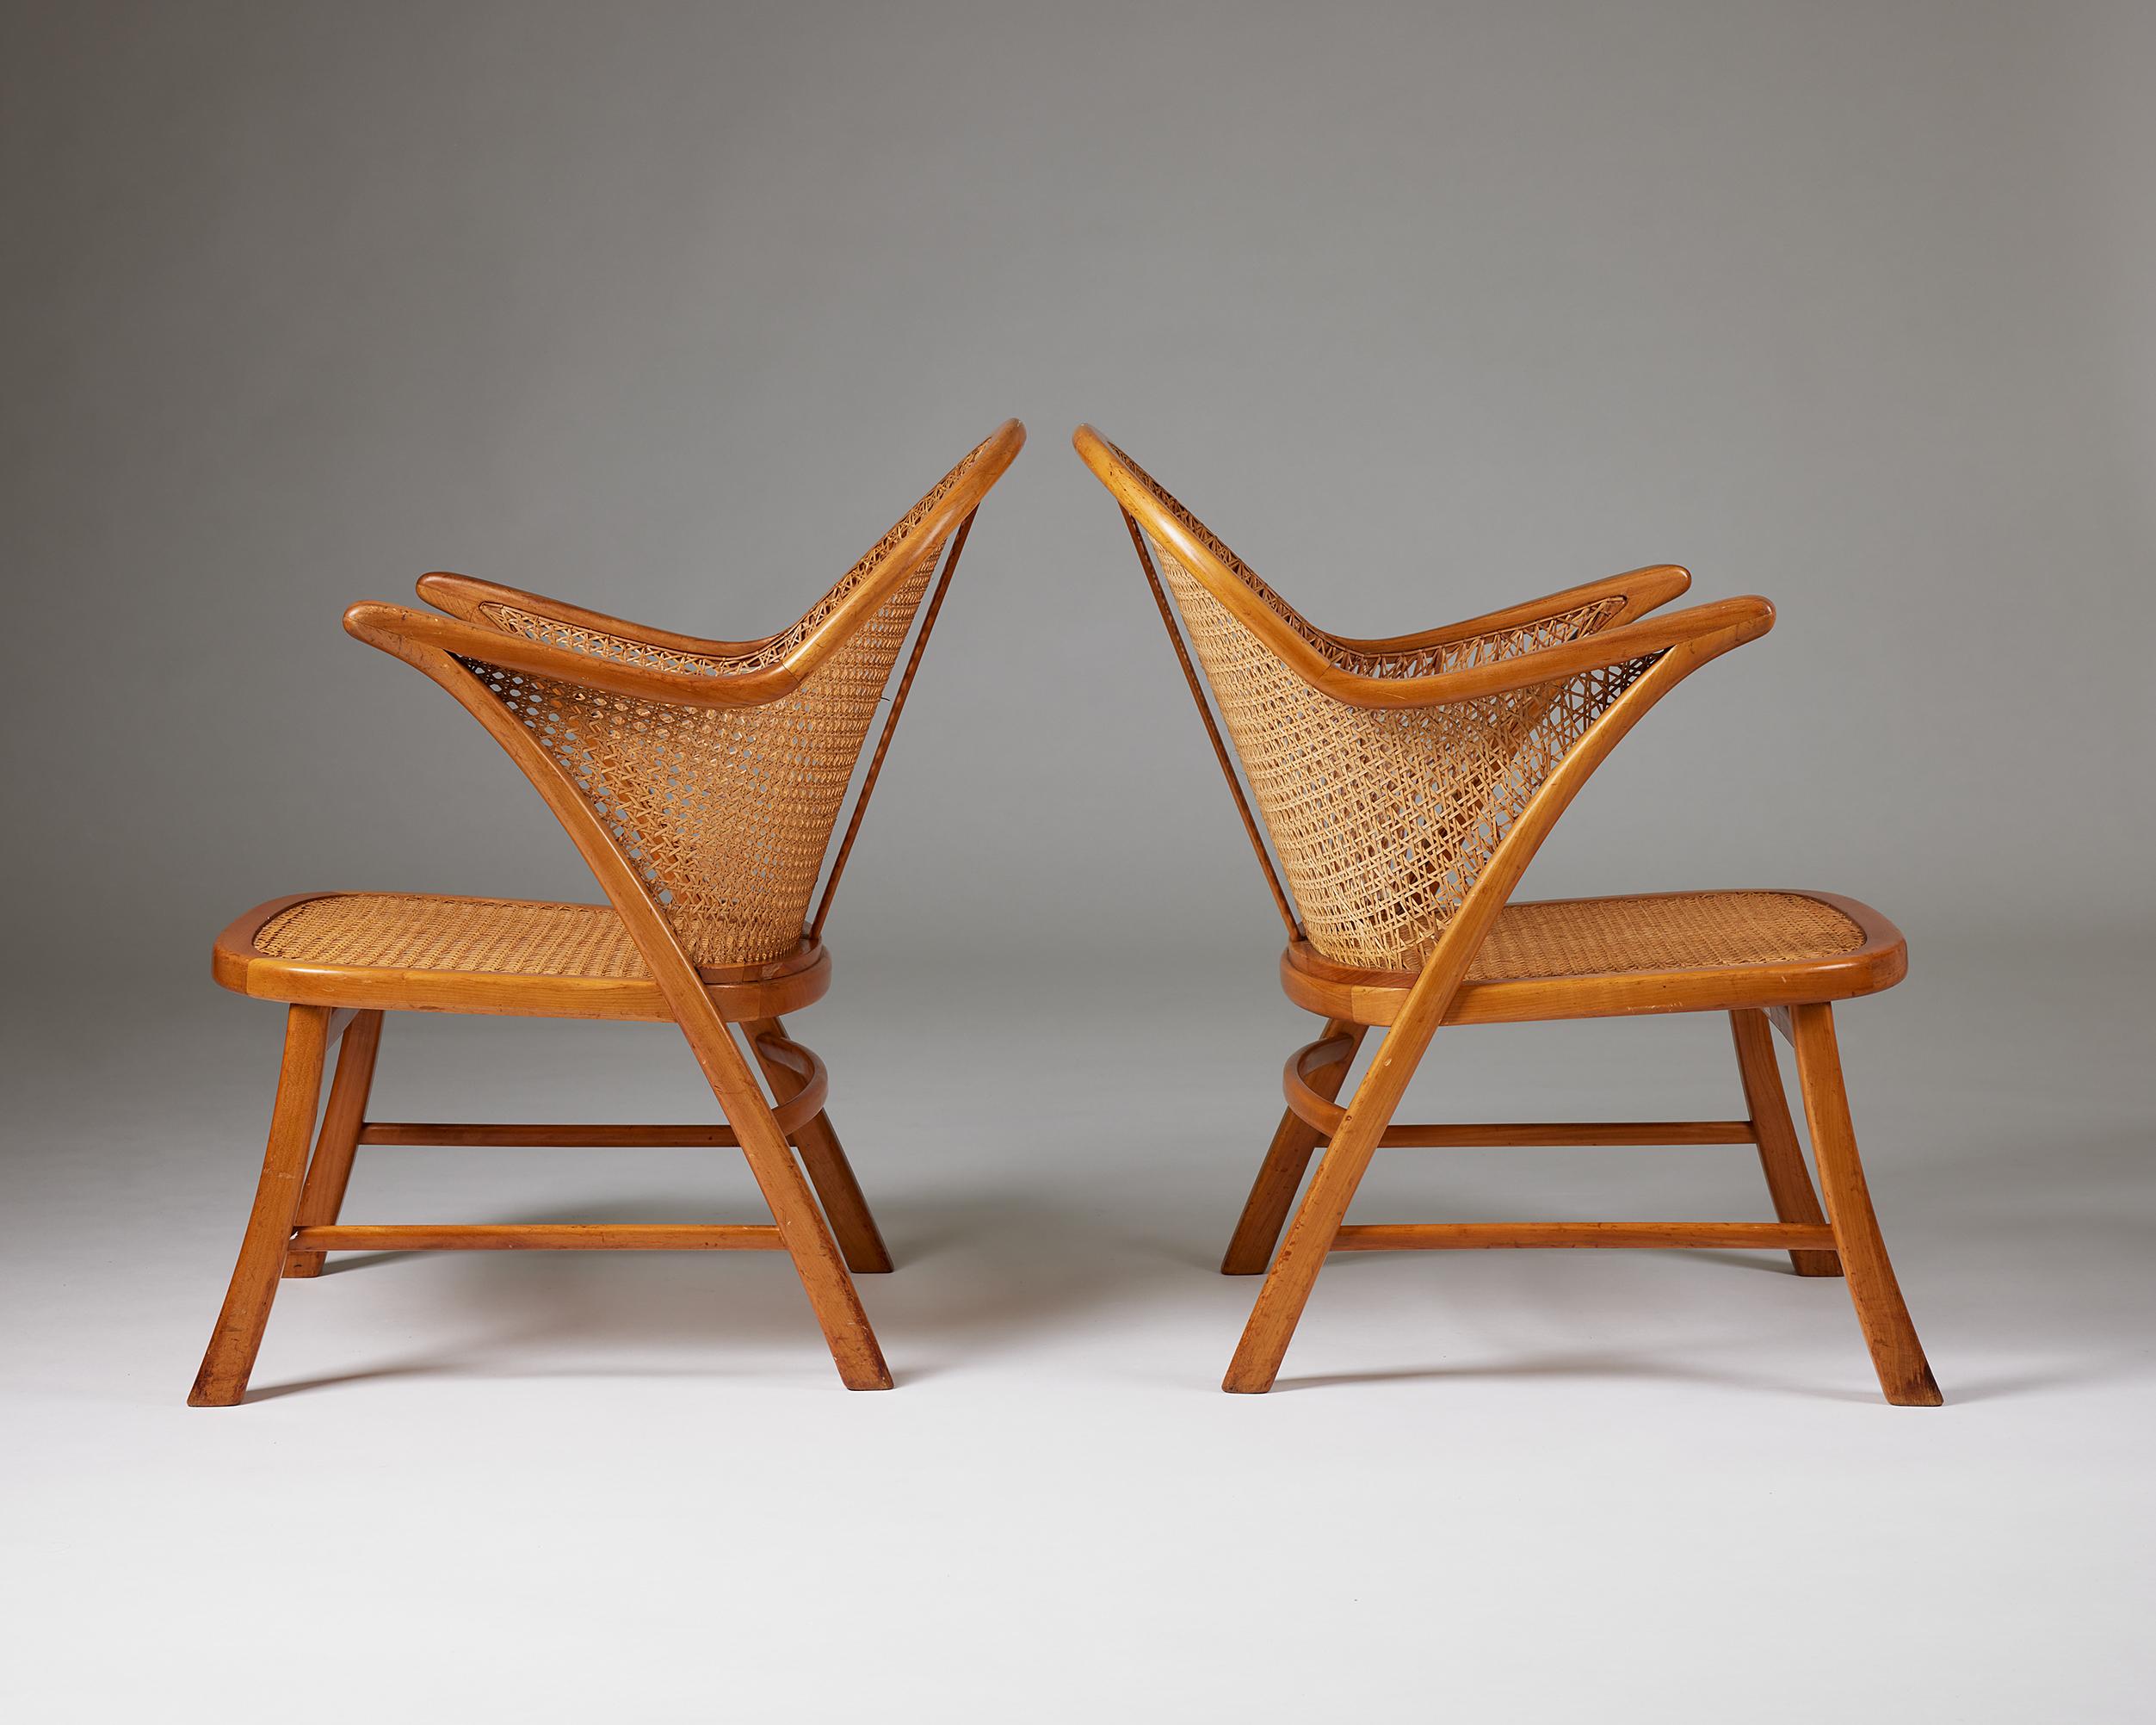 20th Century Pair of Armchairs Attributed to Frits Schlegel, Denmark, 1930s-1940s